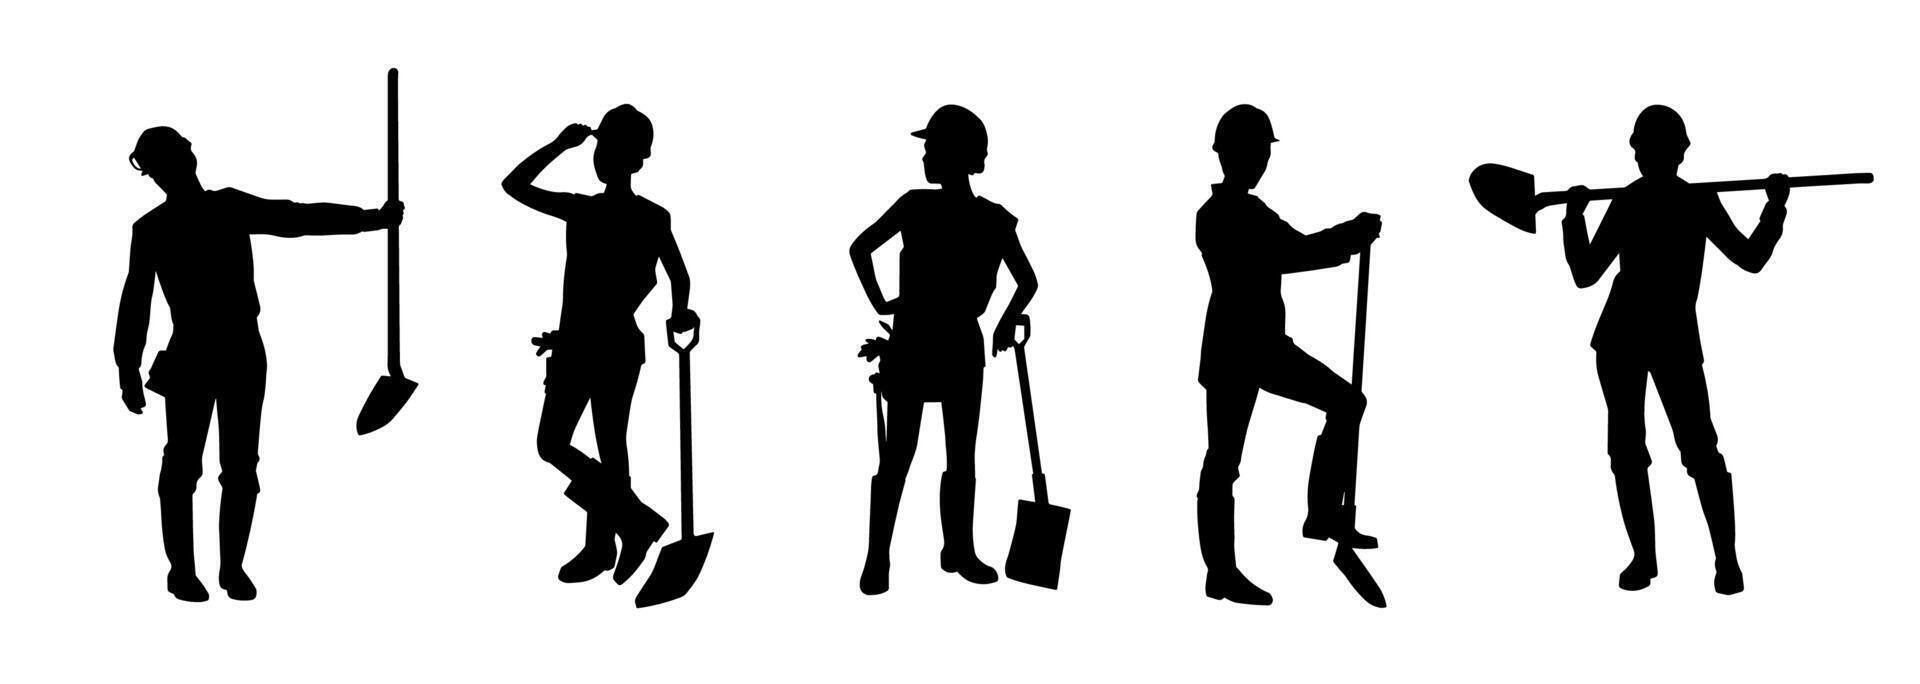 Silhouette collection of female wearing worker costume in action pose with shovel tool. vector